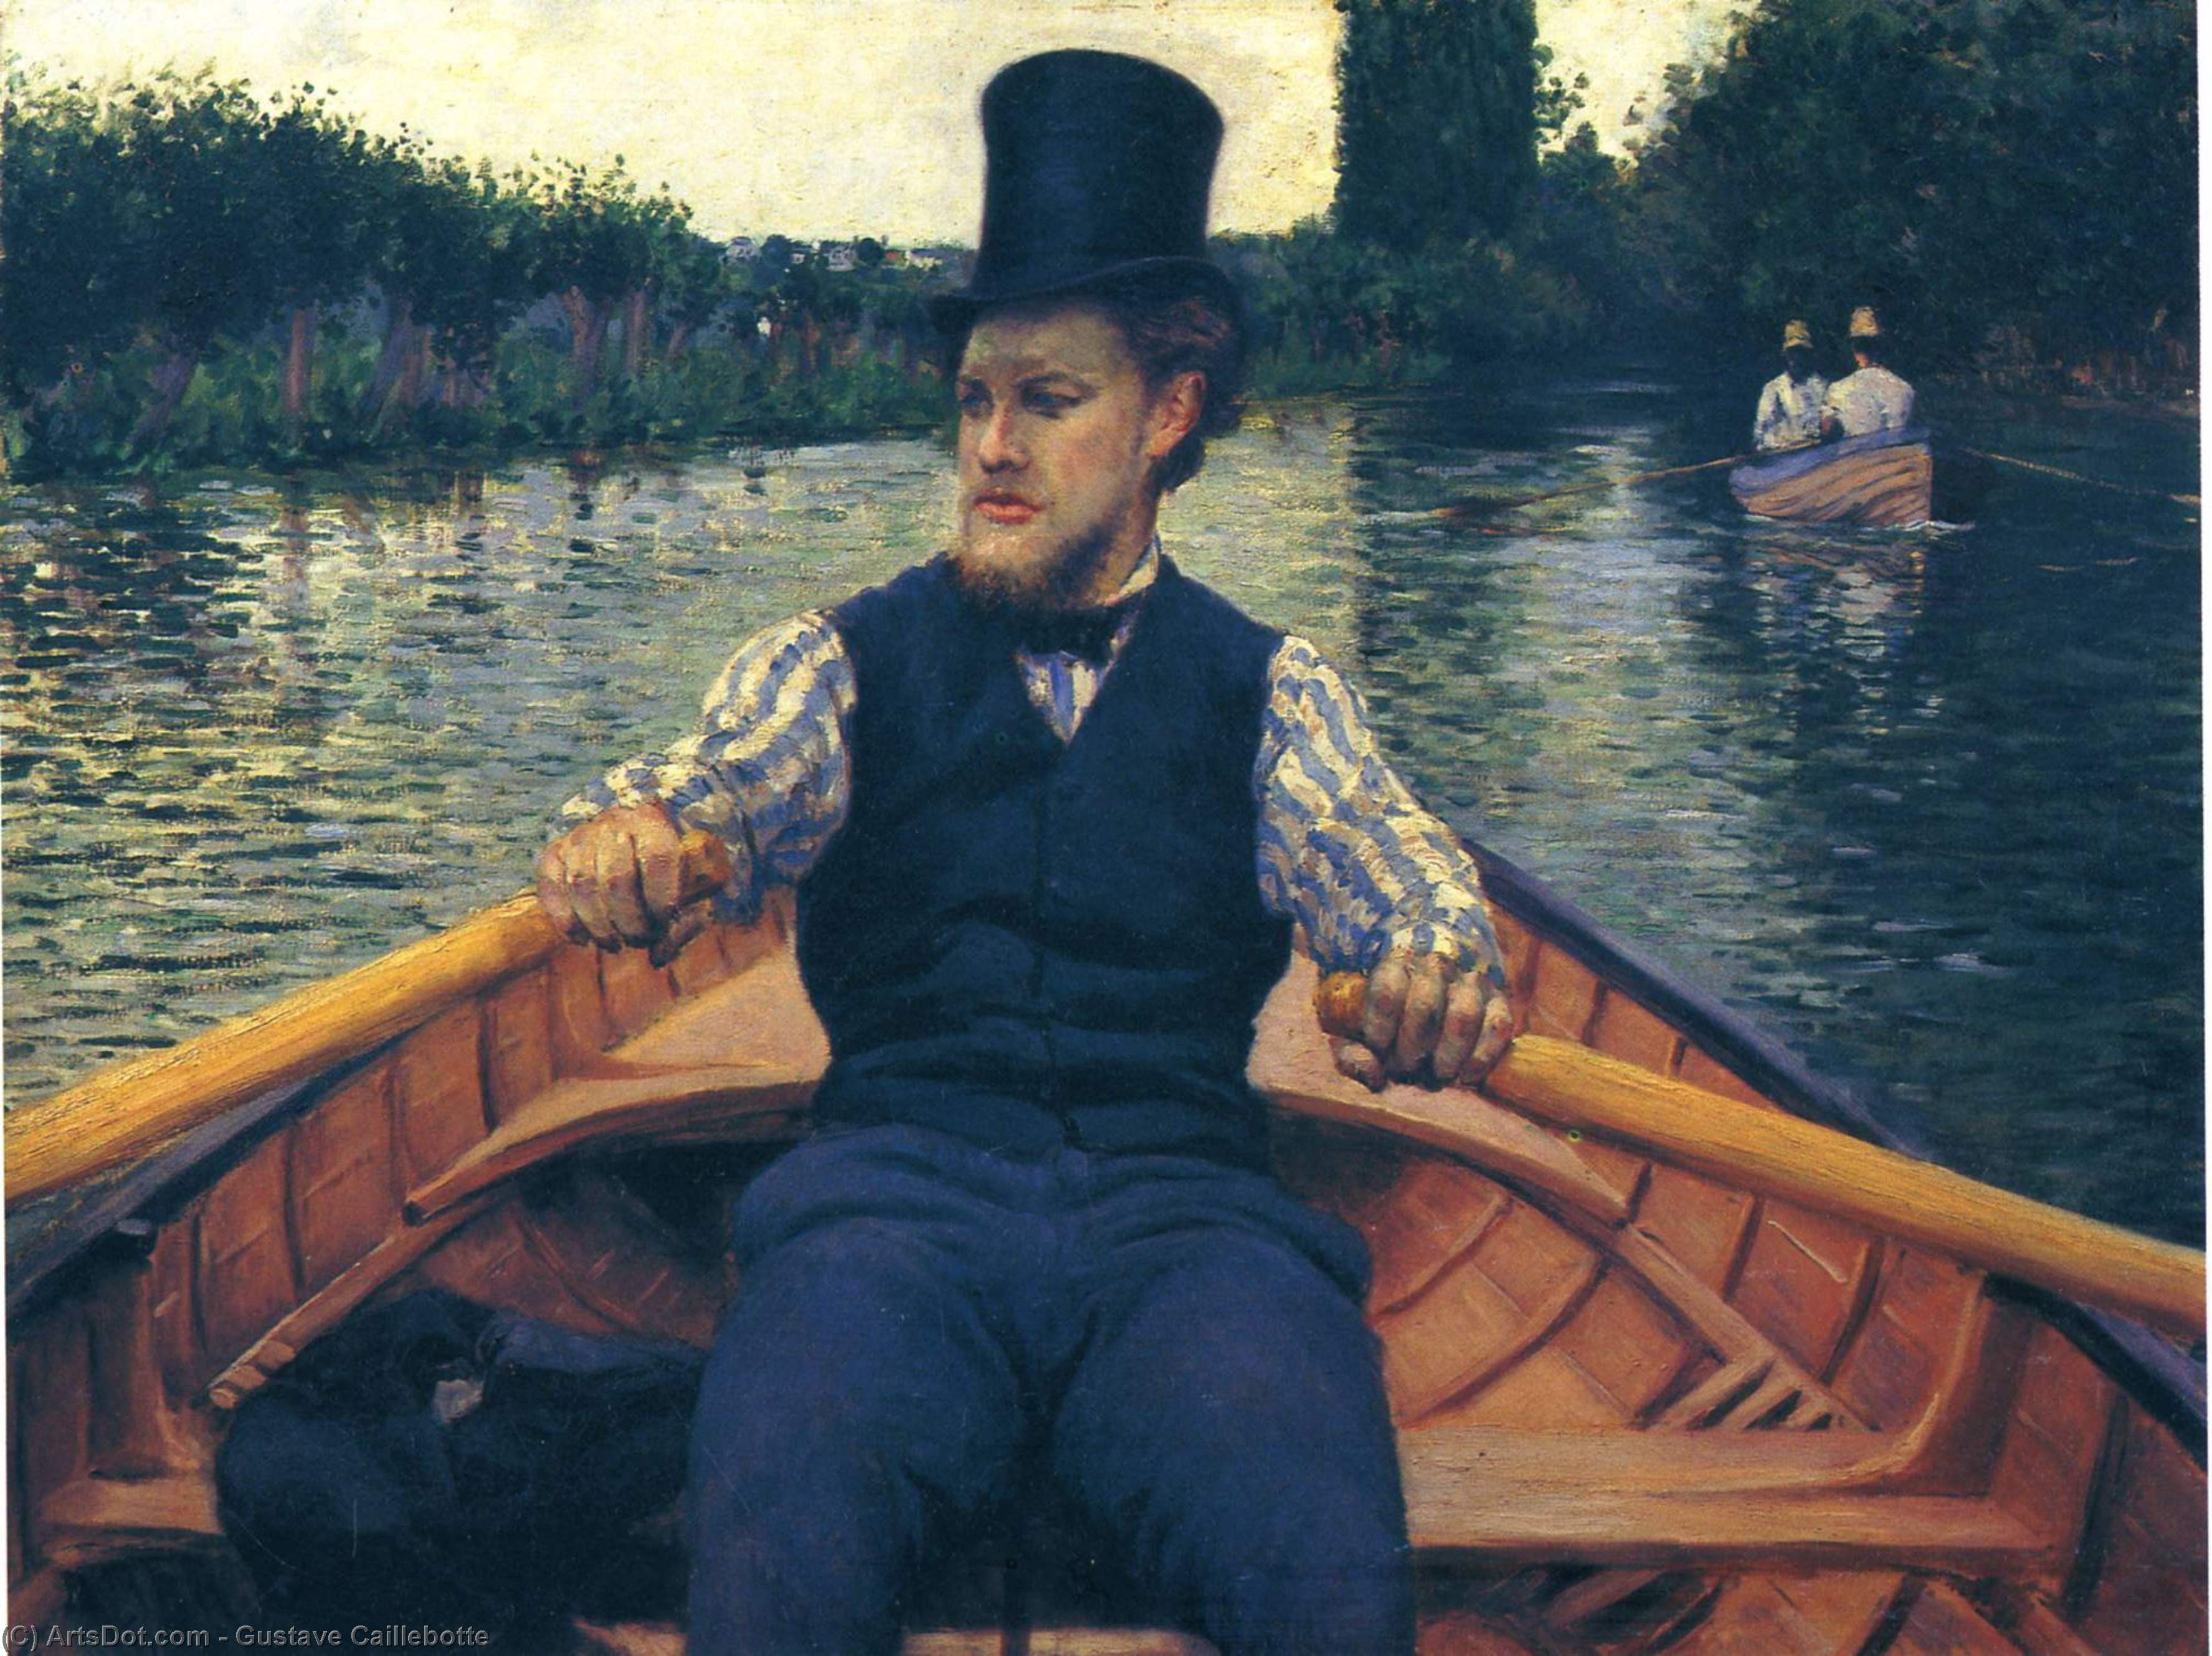 WikiOO.org - 백과 사전 - 회화, 삽화 Gustave Caillebotte - Rower in a Top Hat